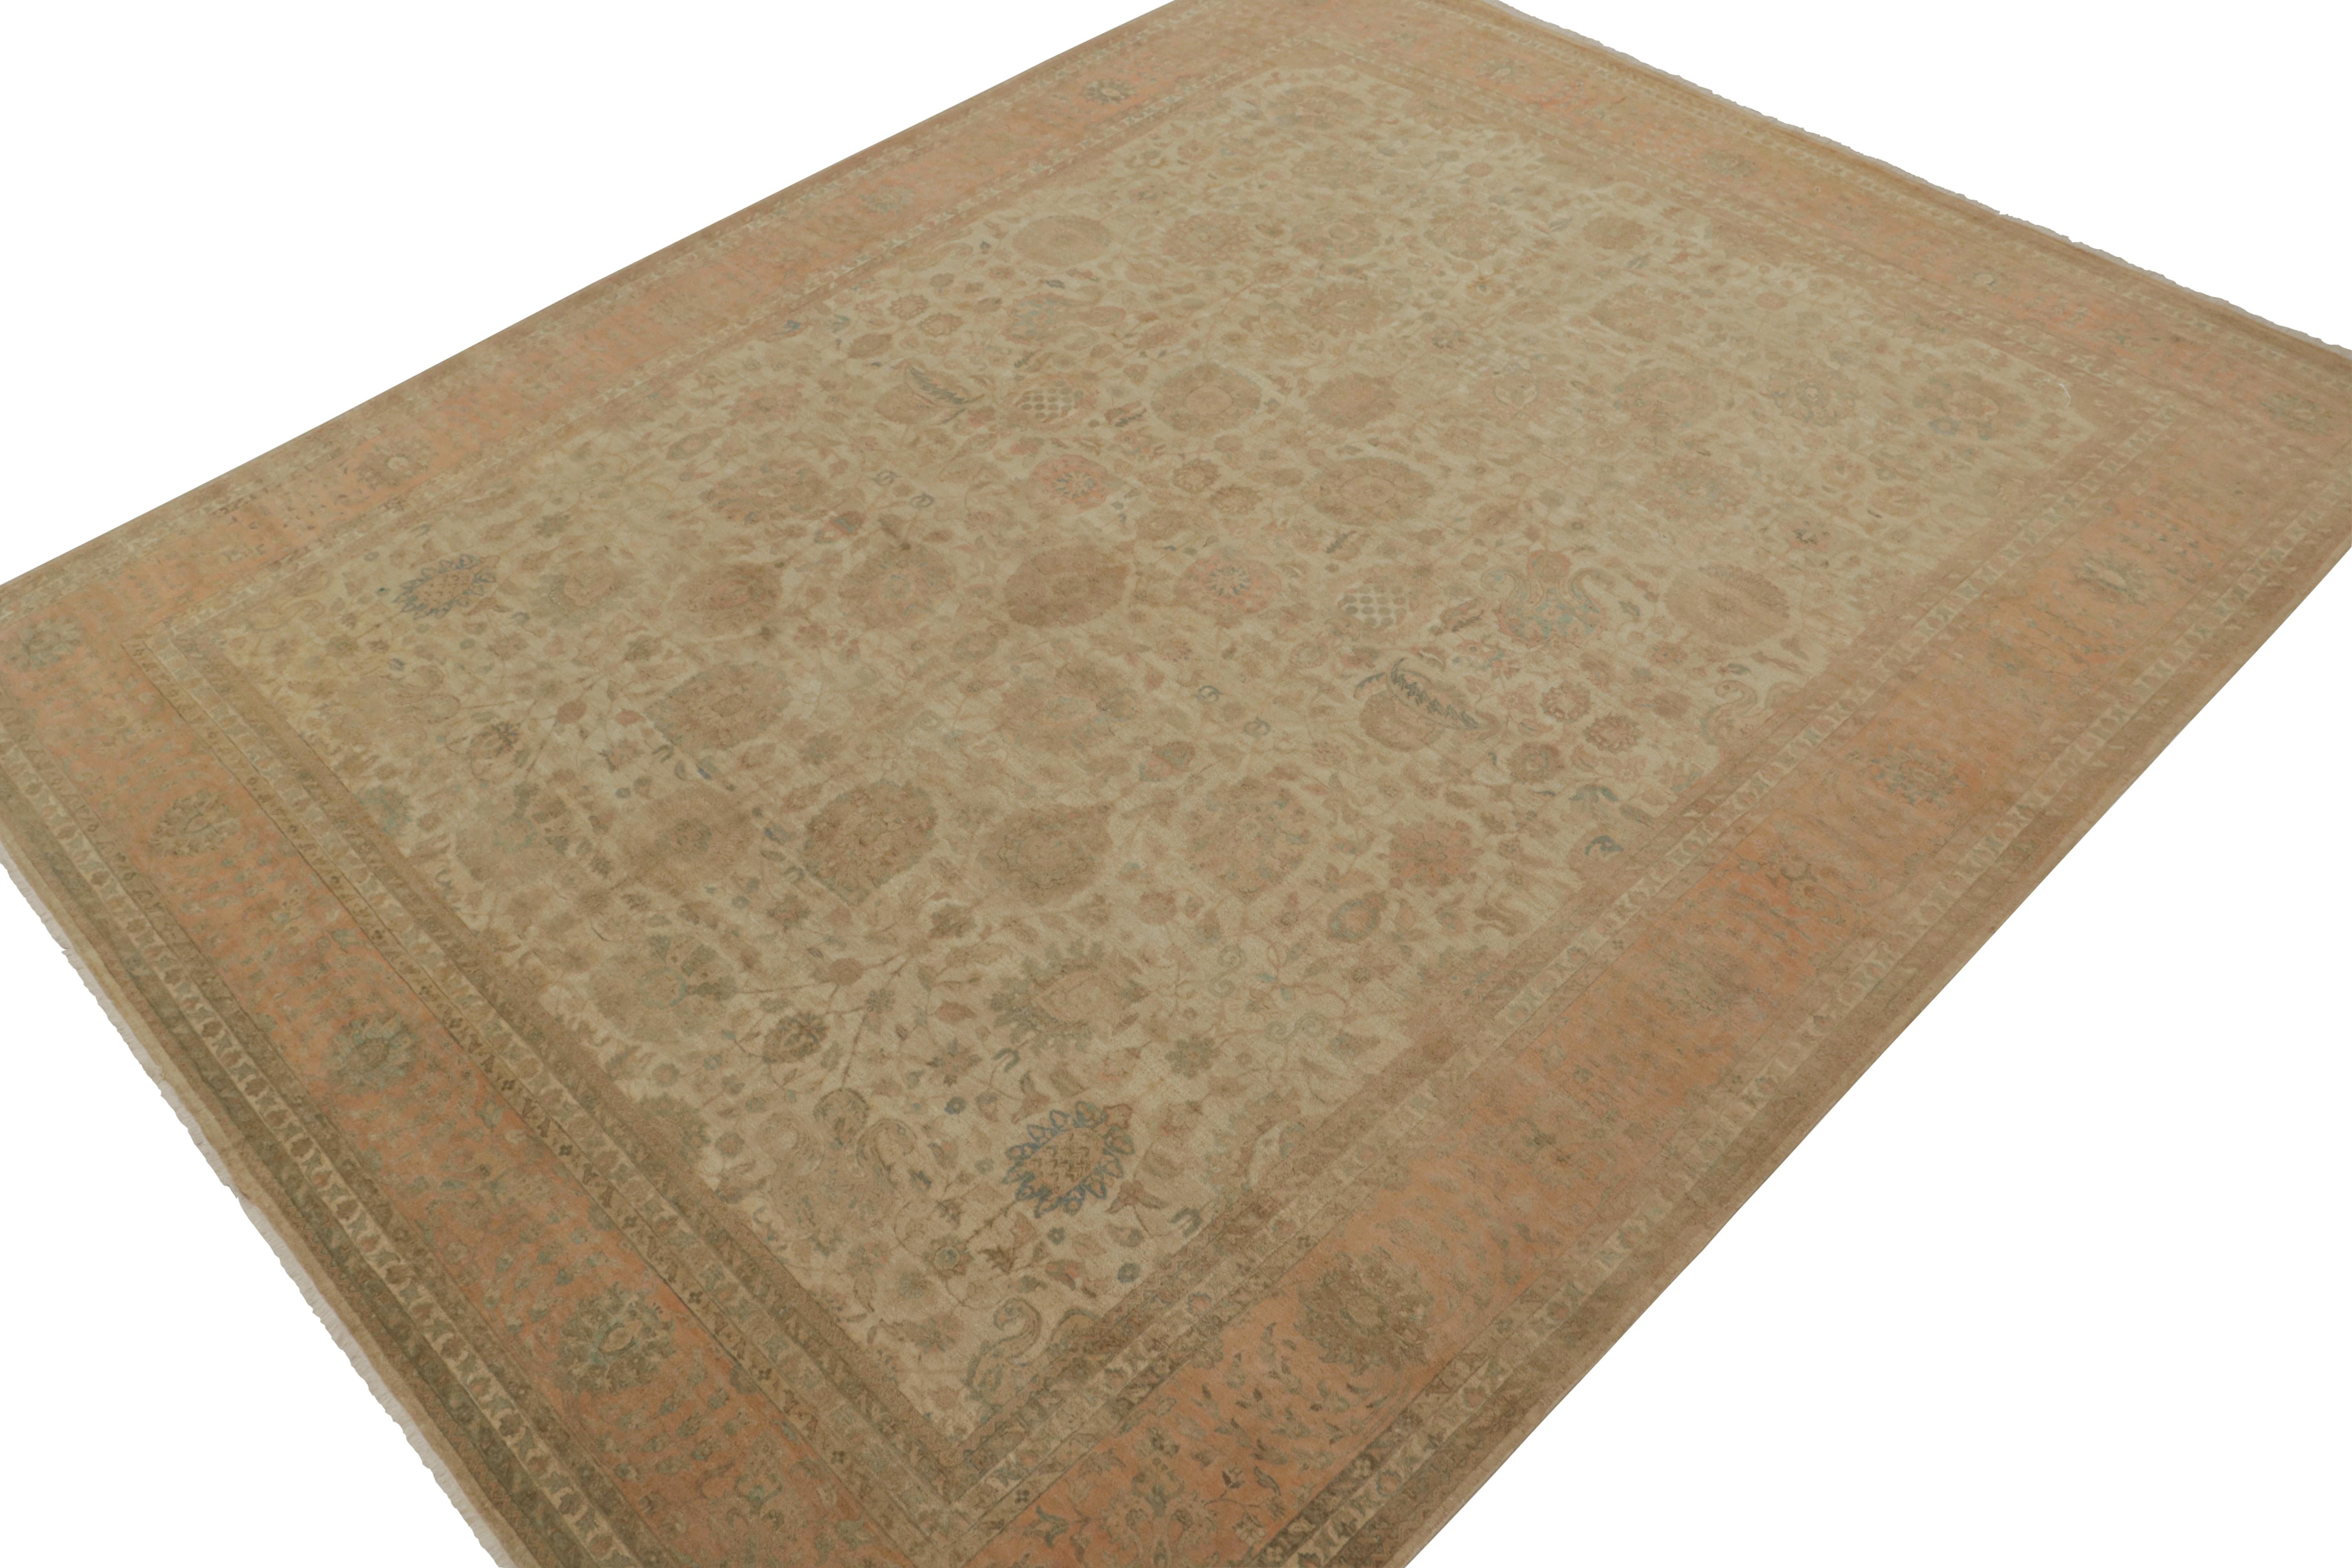 Tabriz Rug & Kilim’s Classic Persian Style Rug in Beige-Brown with Pink Floral Patterns For Sale